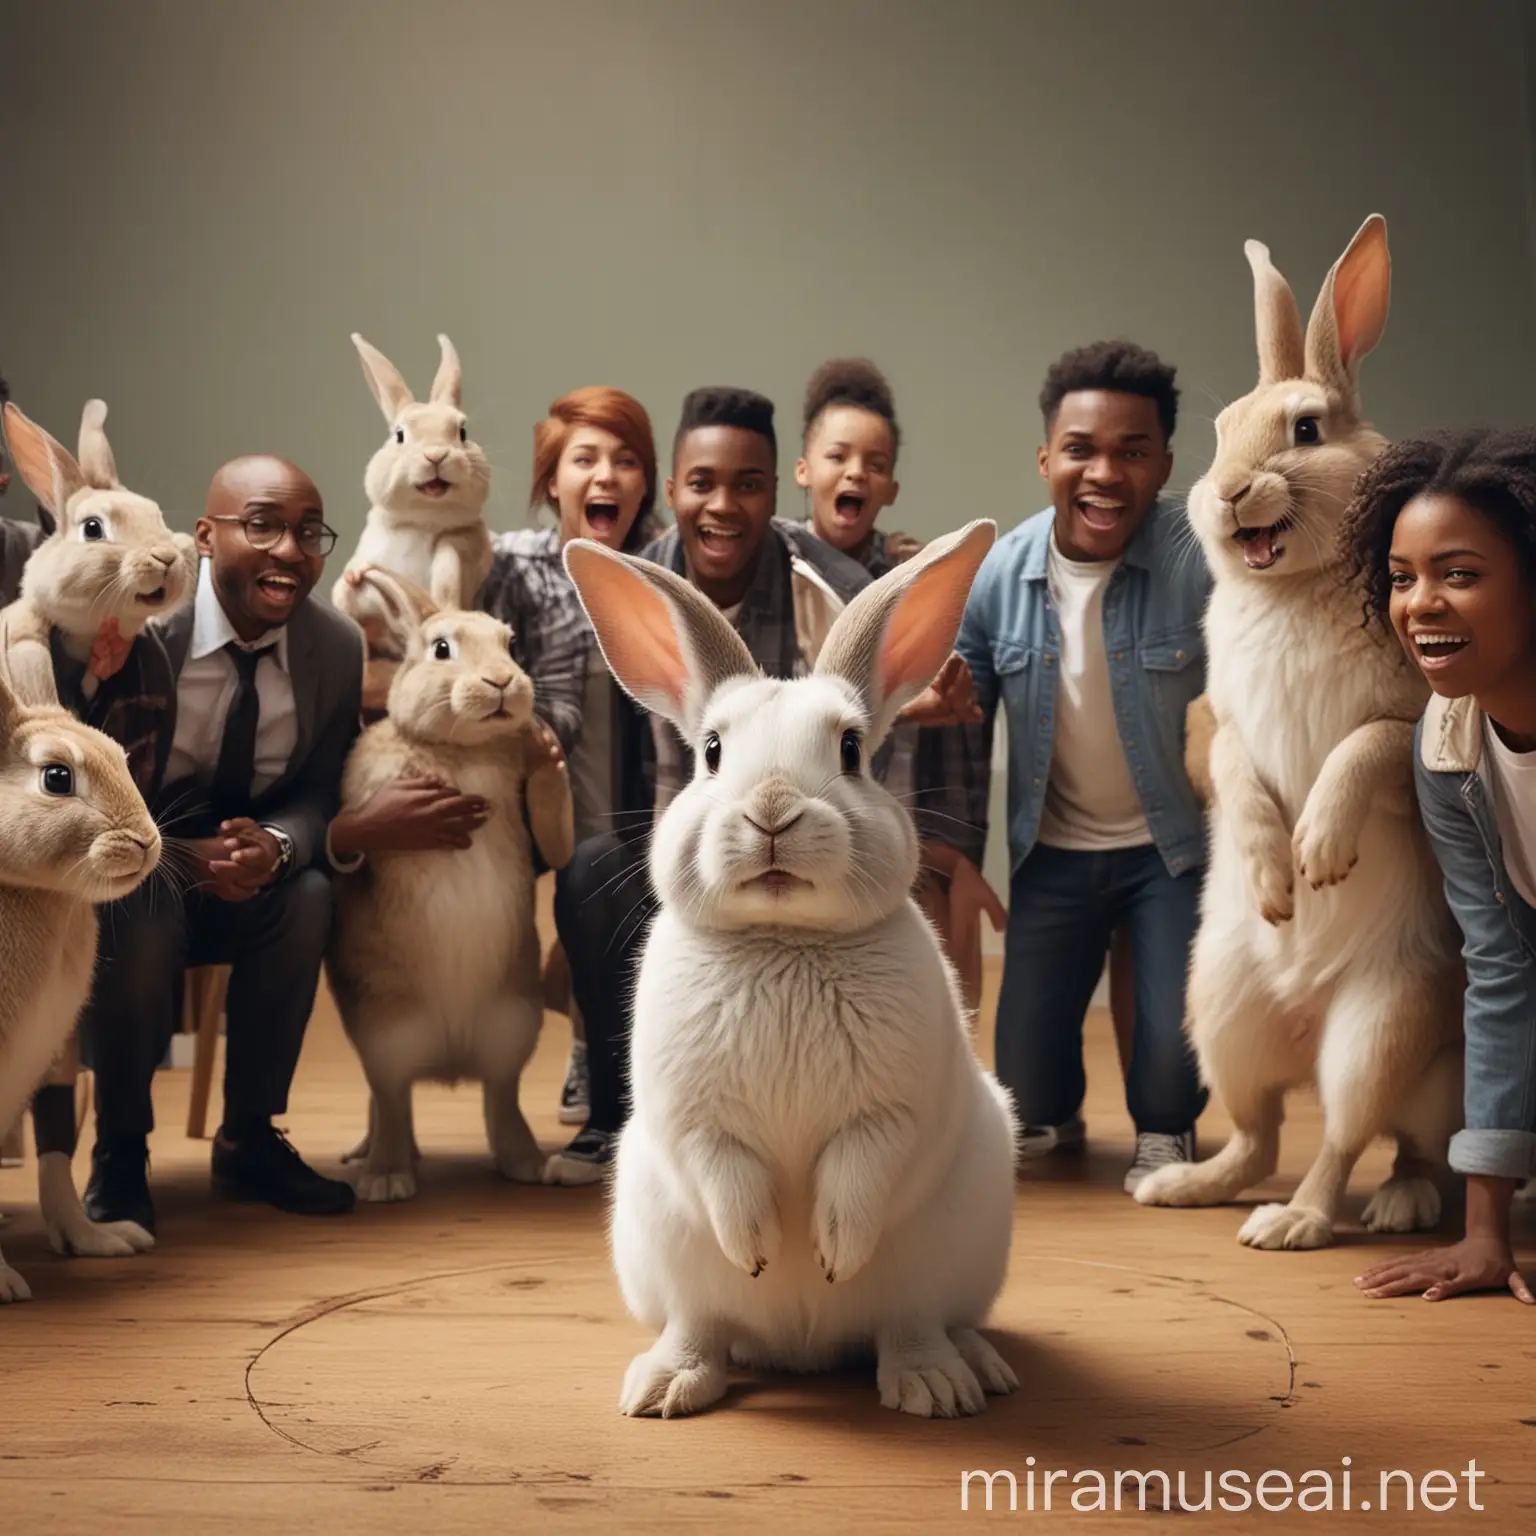 Lonely Rabbit Surrounded by Mocking Crowd